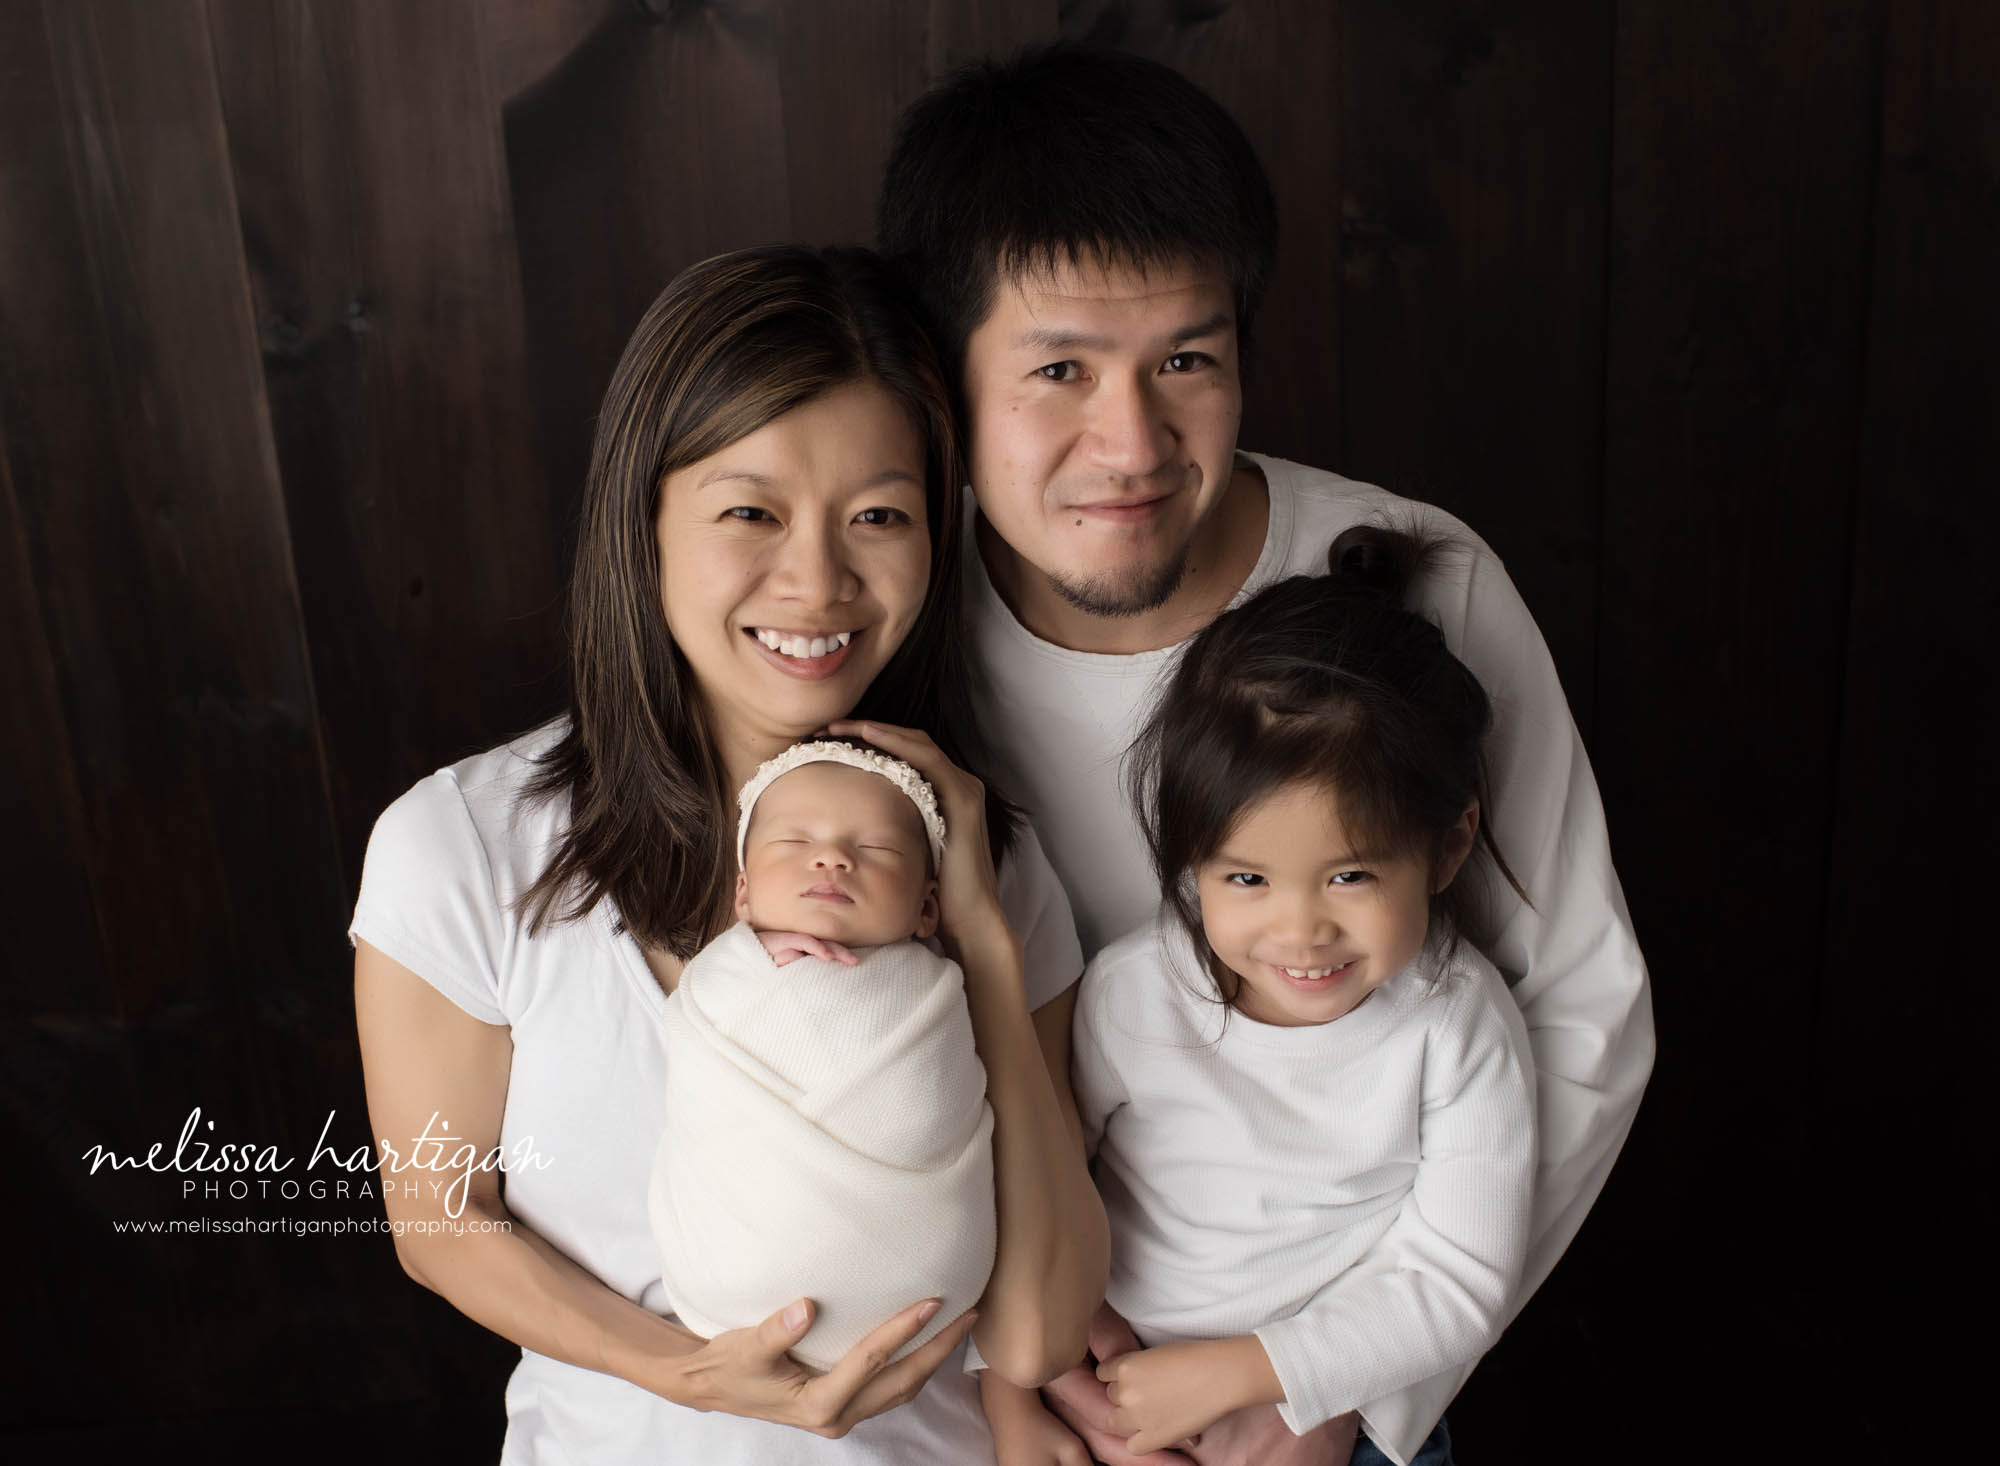 mom dad big brother and baby girl posed together for family pose newborn photography photoshoot